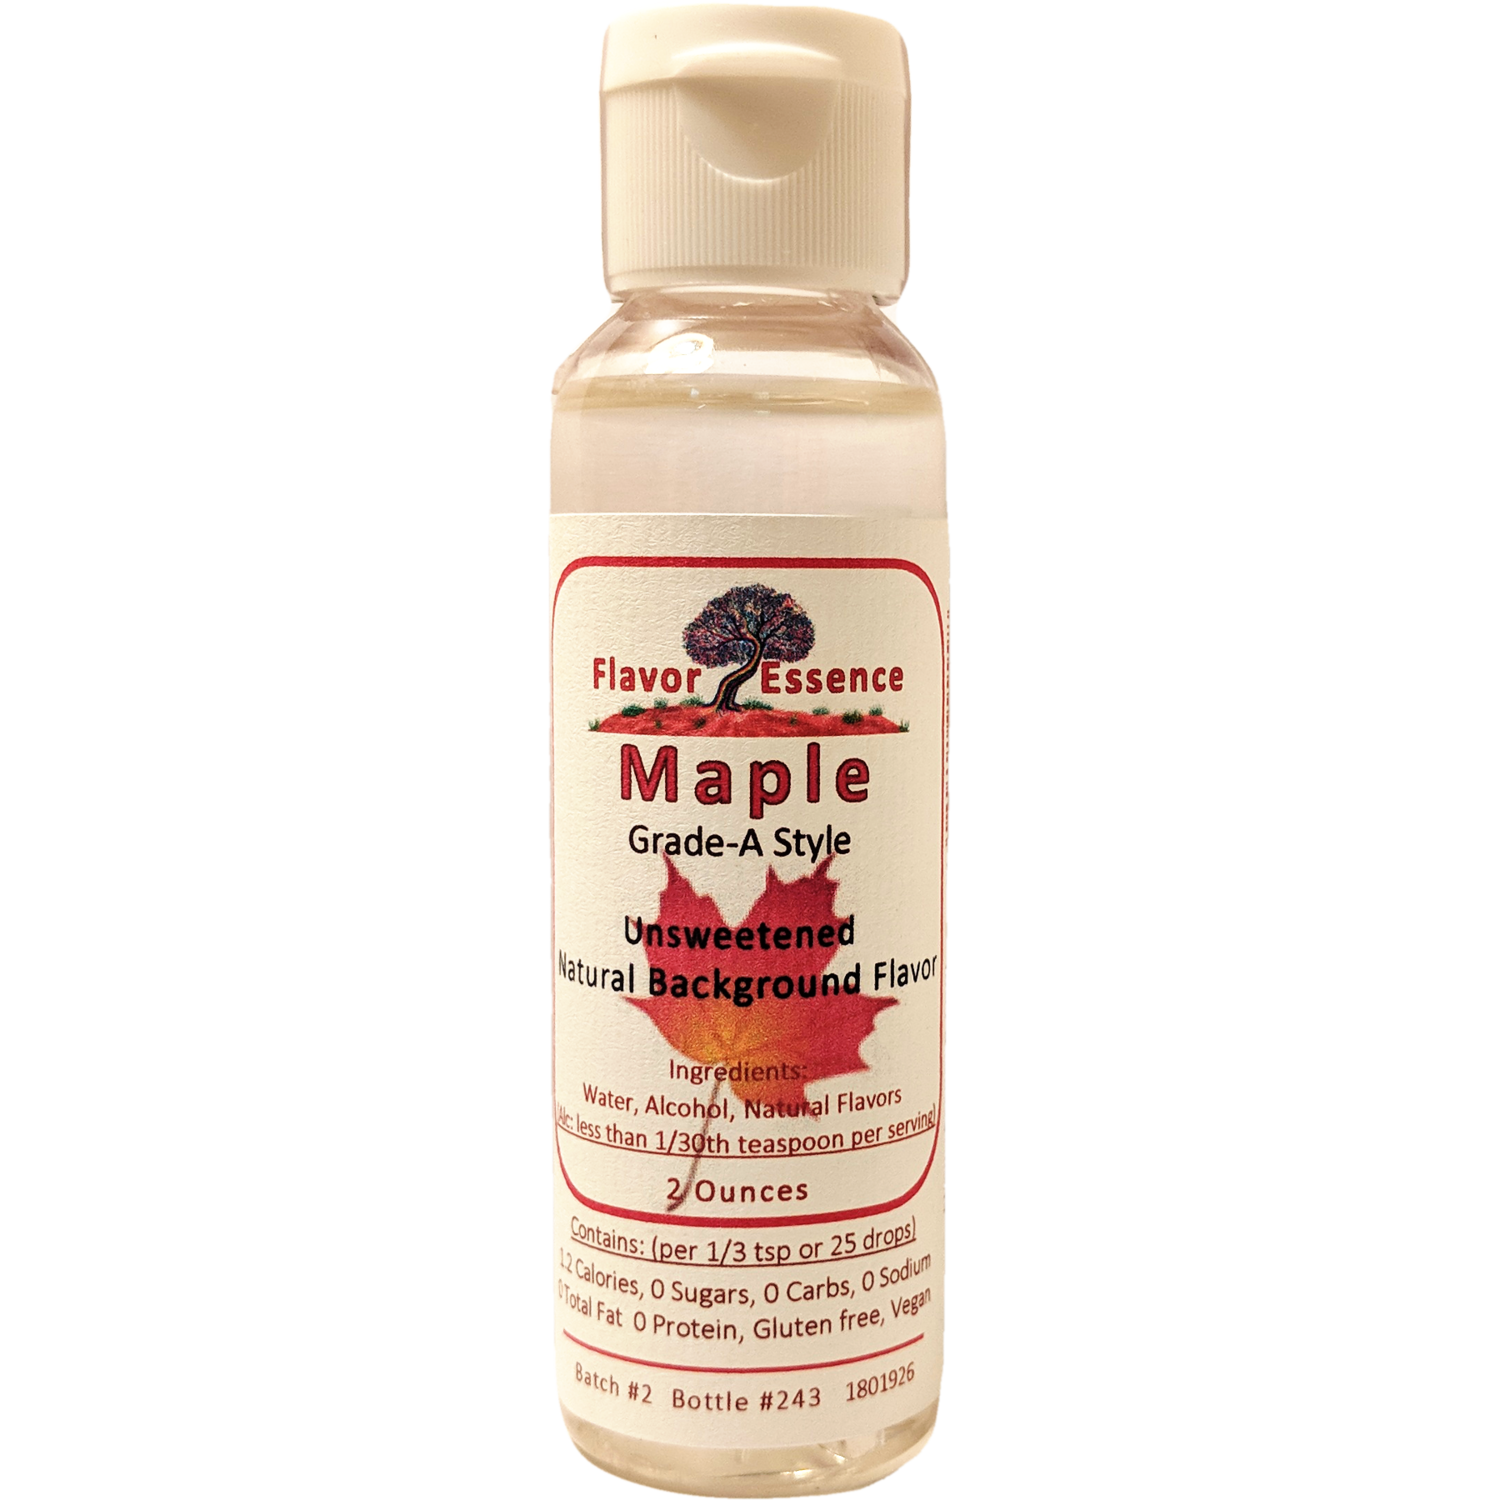 Flavor Essence Maple 2oz - Natural Unsweetened Background Flavoring